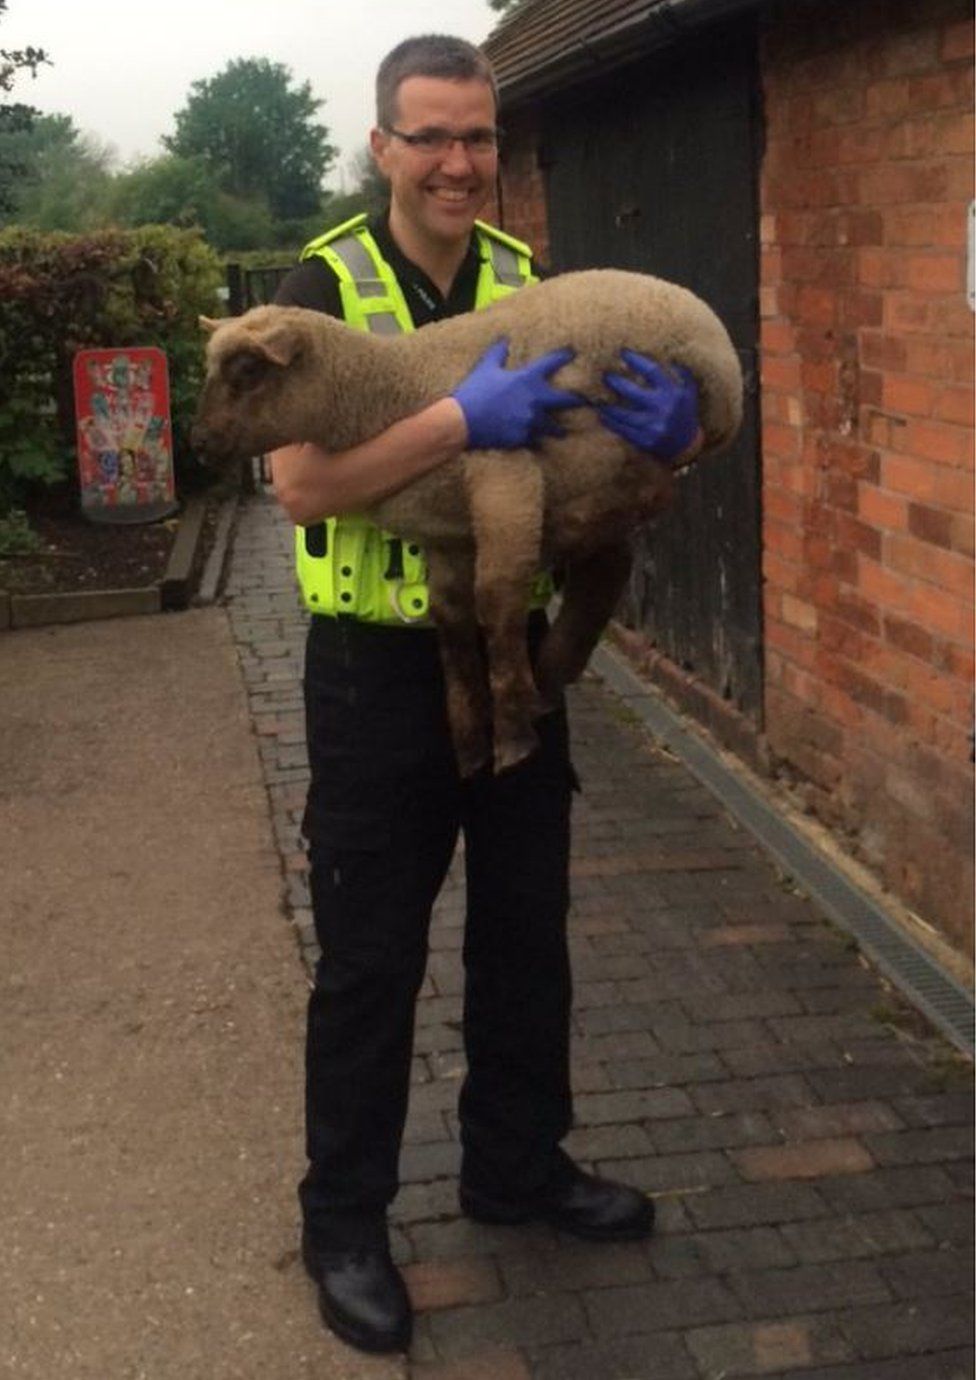 Inspector Clive Baynton holds one of the lambs